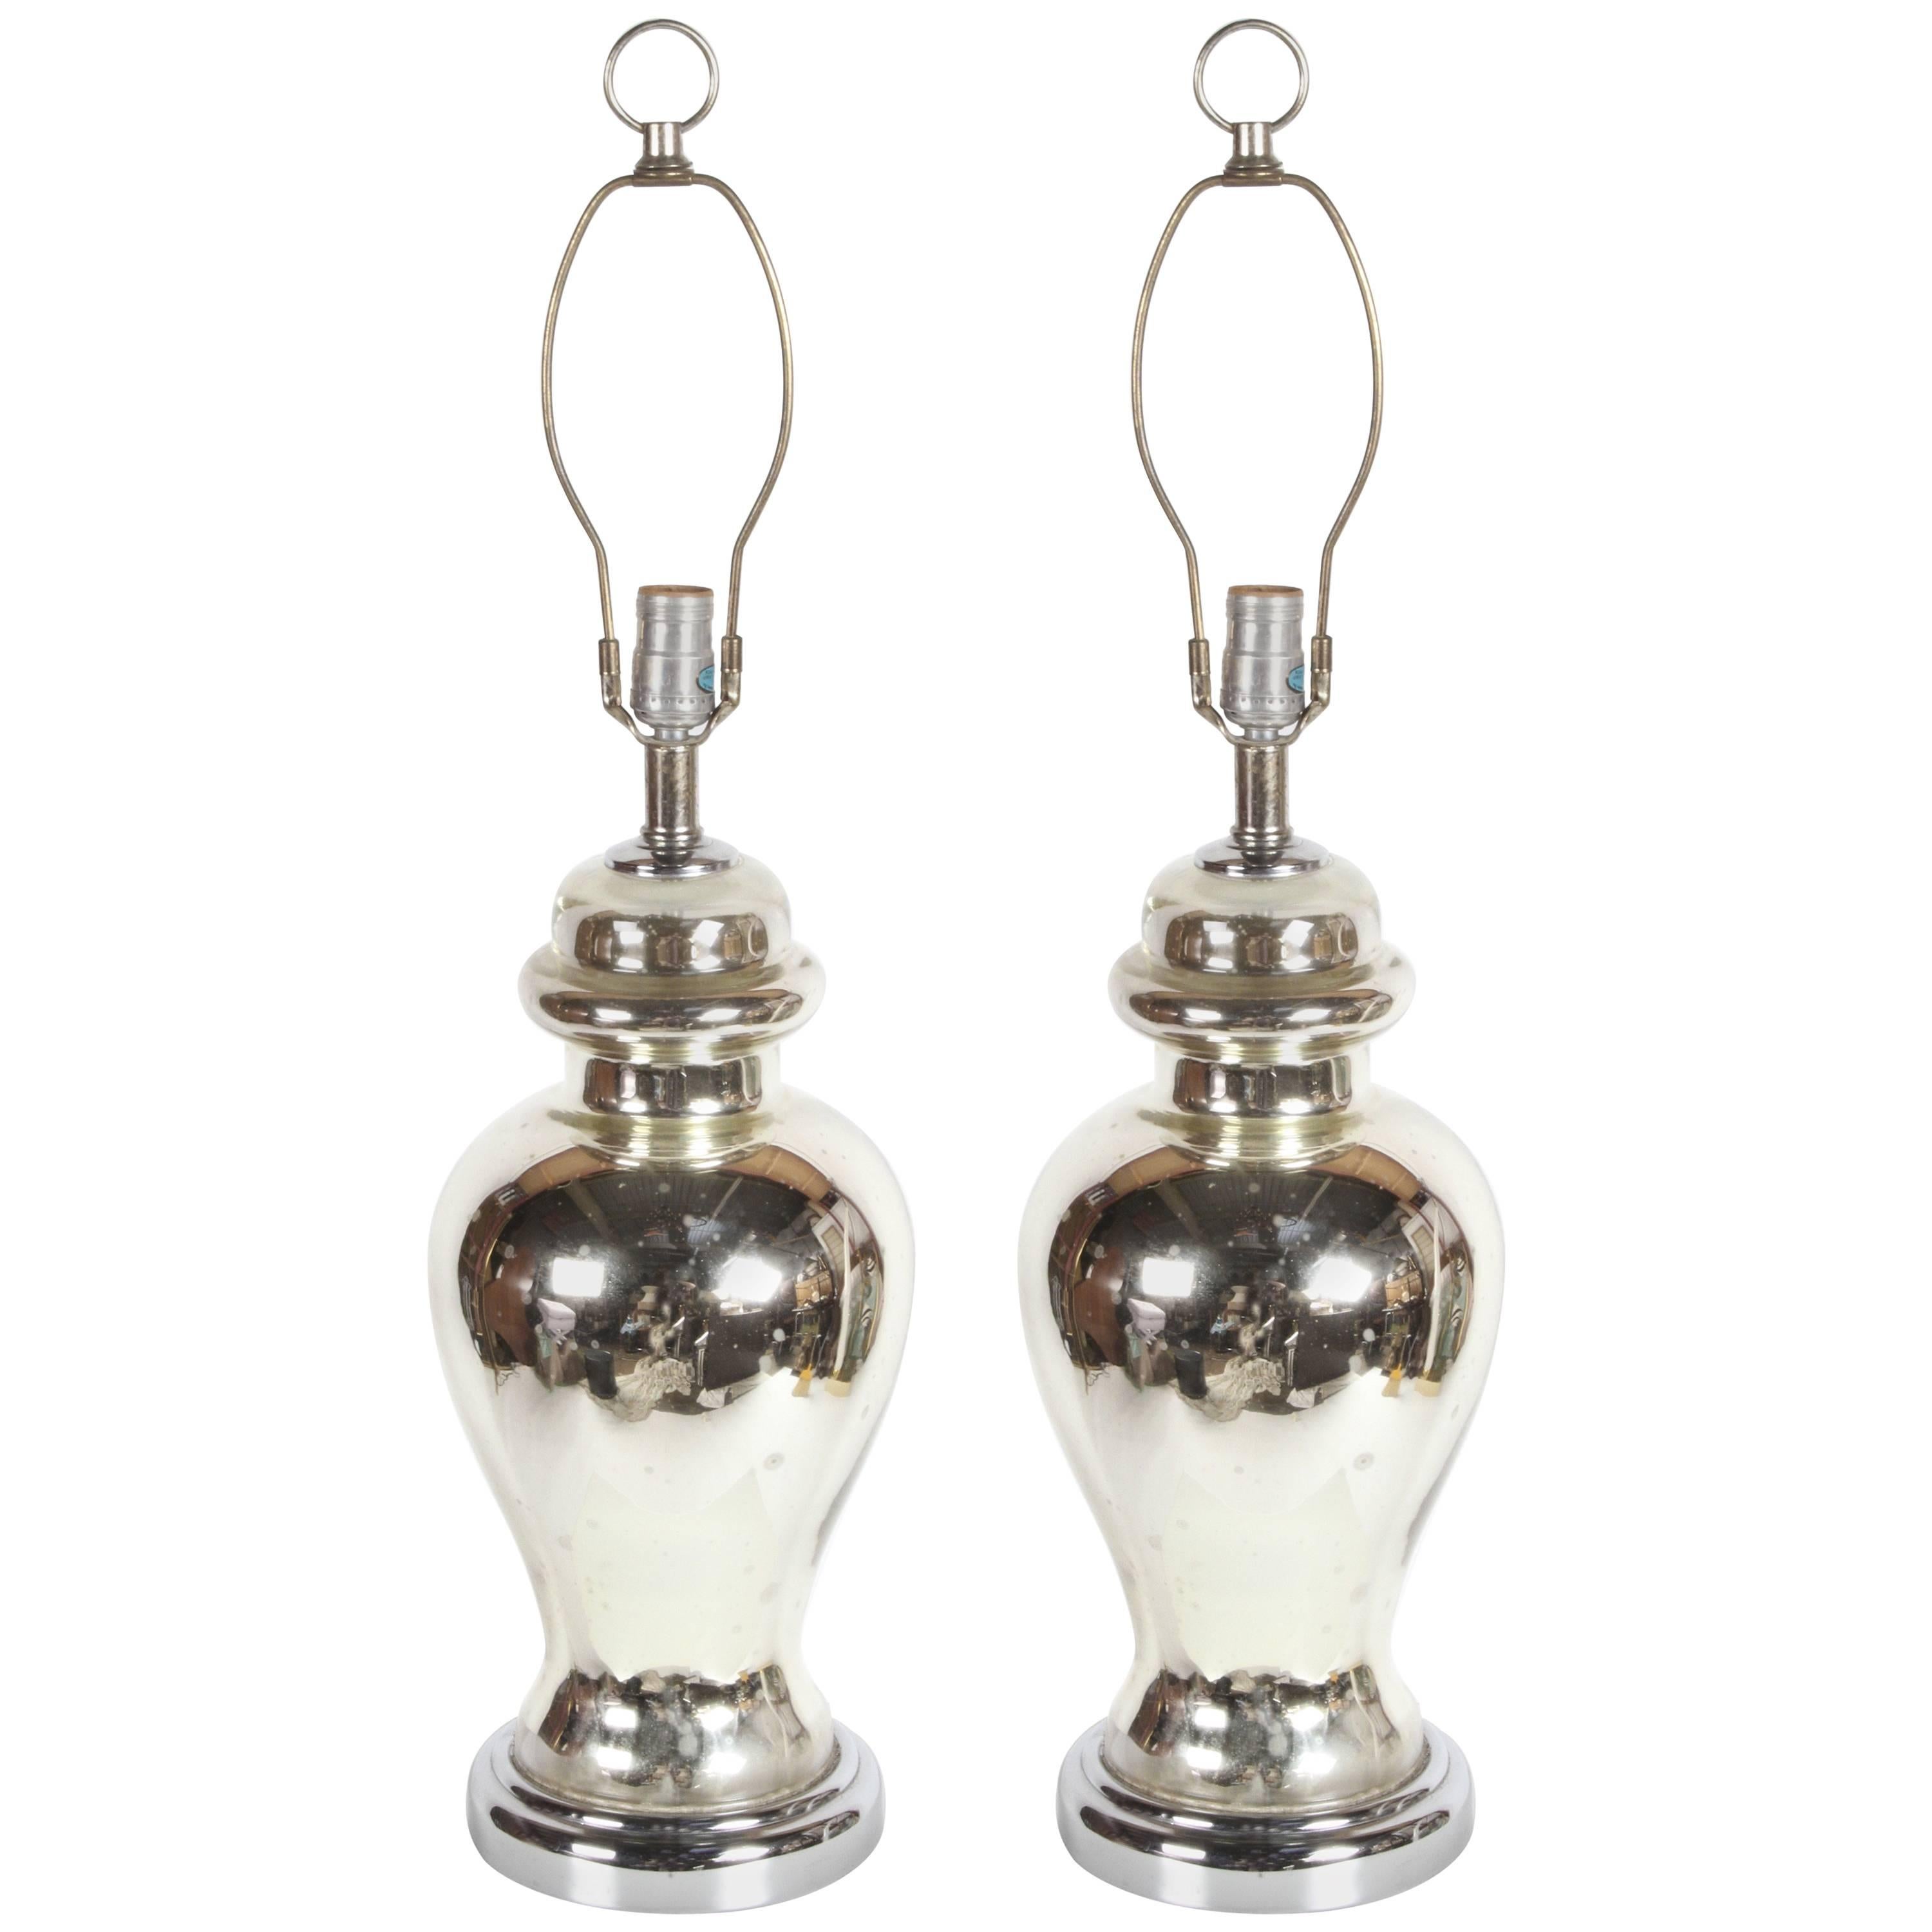 Pair of Mid-Century Classical Urn Form Mercury Glass Table Lamps